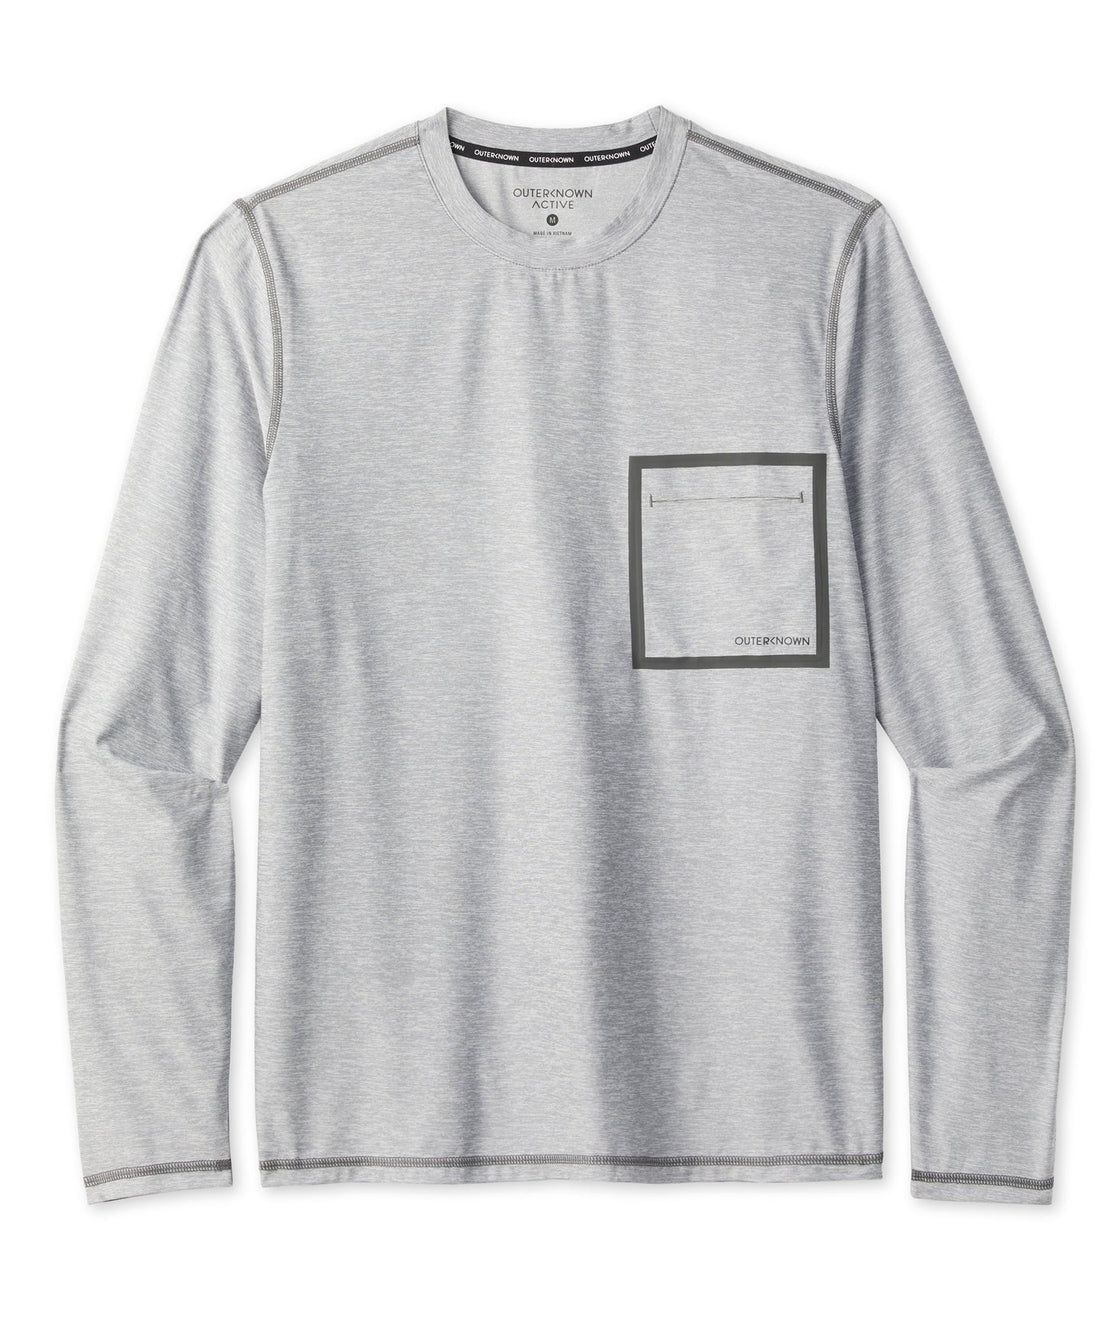 Outerknown - Apex L/S Tee in Heather Grey